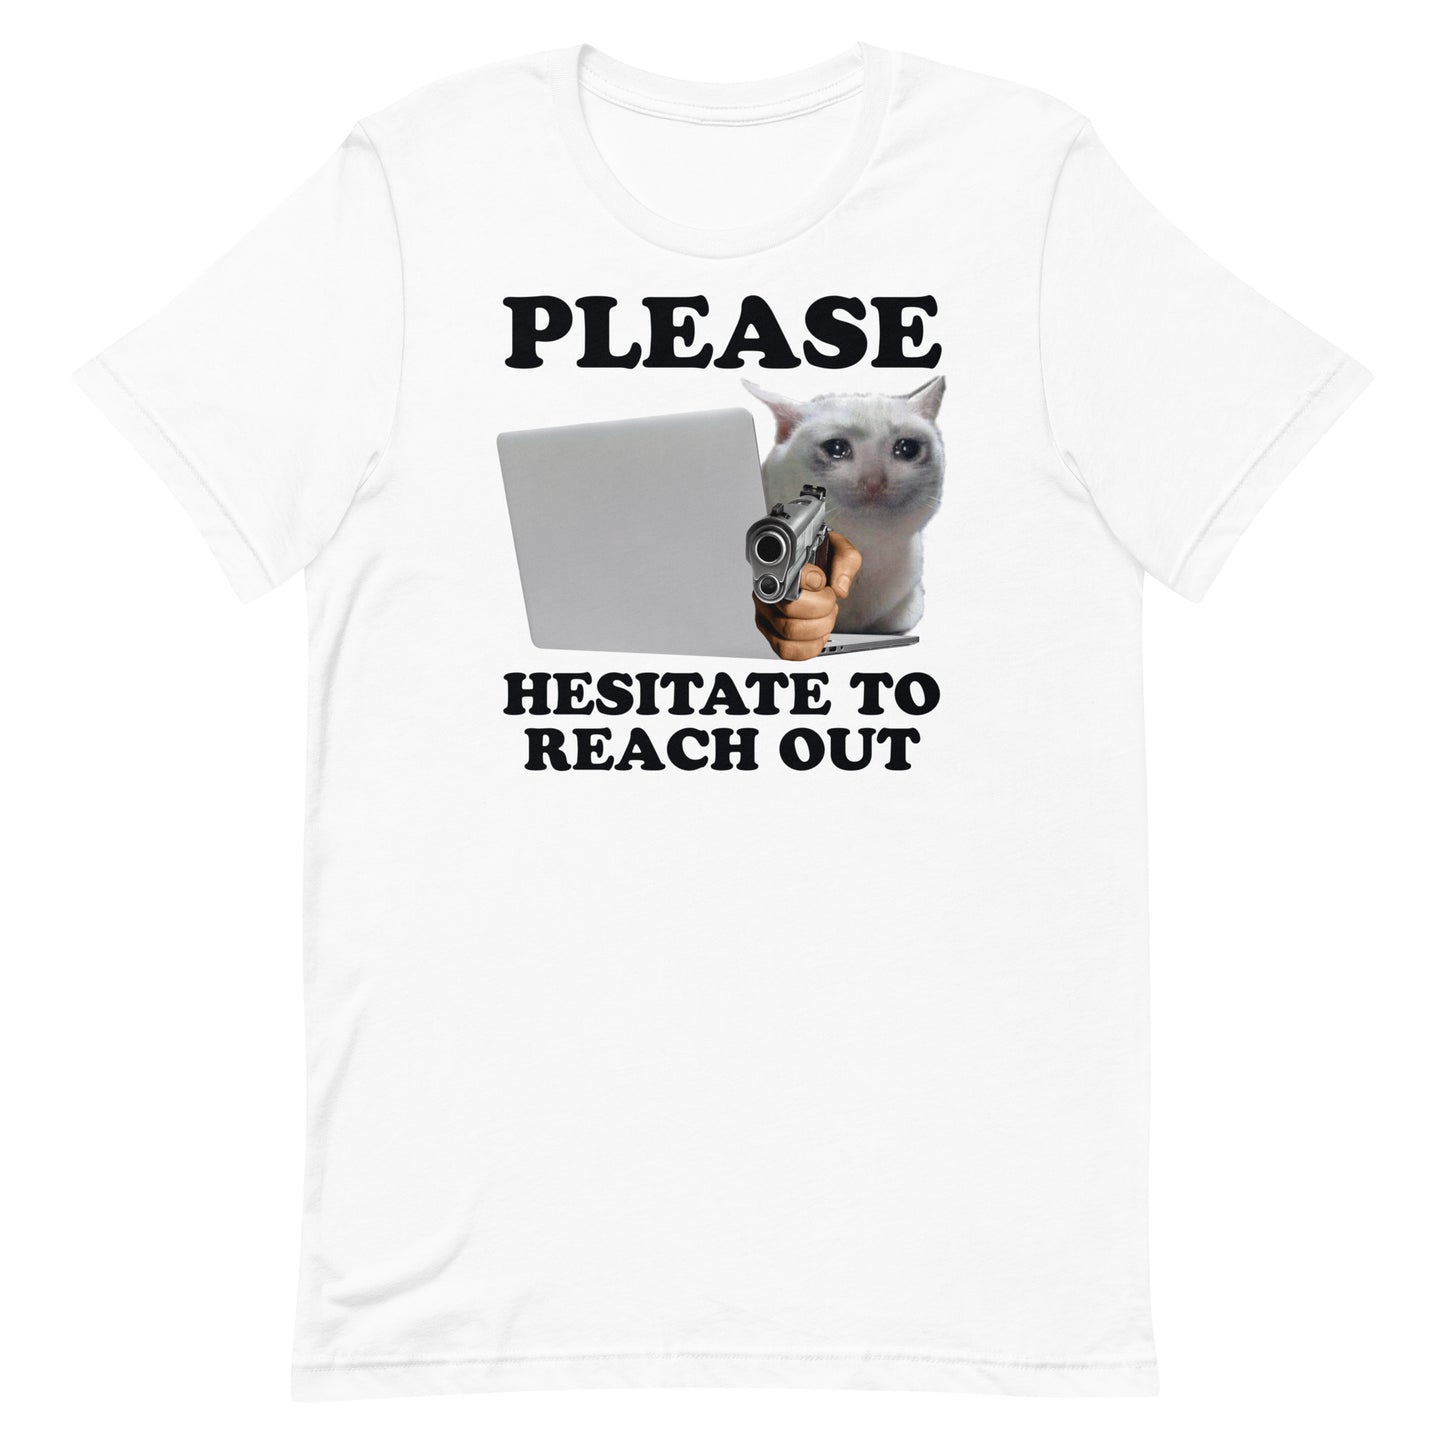 Please Hesitate to Reach Out Unisex t-shirt